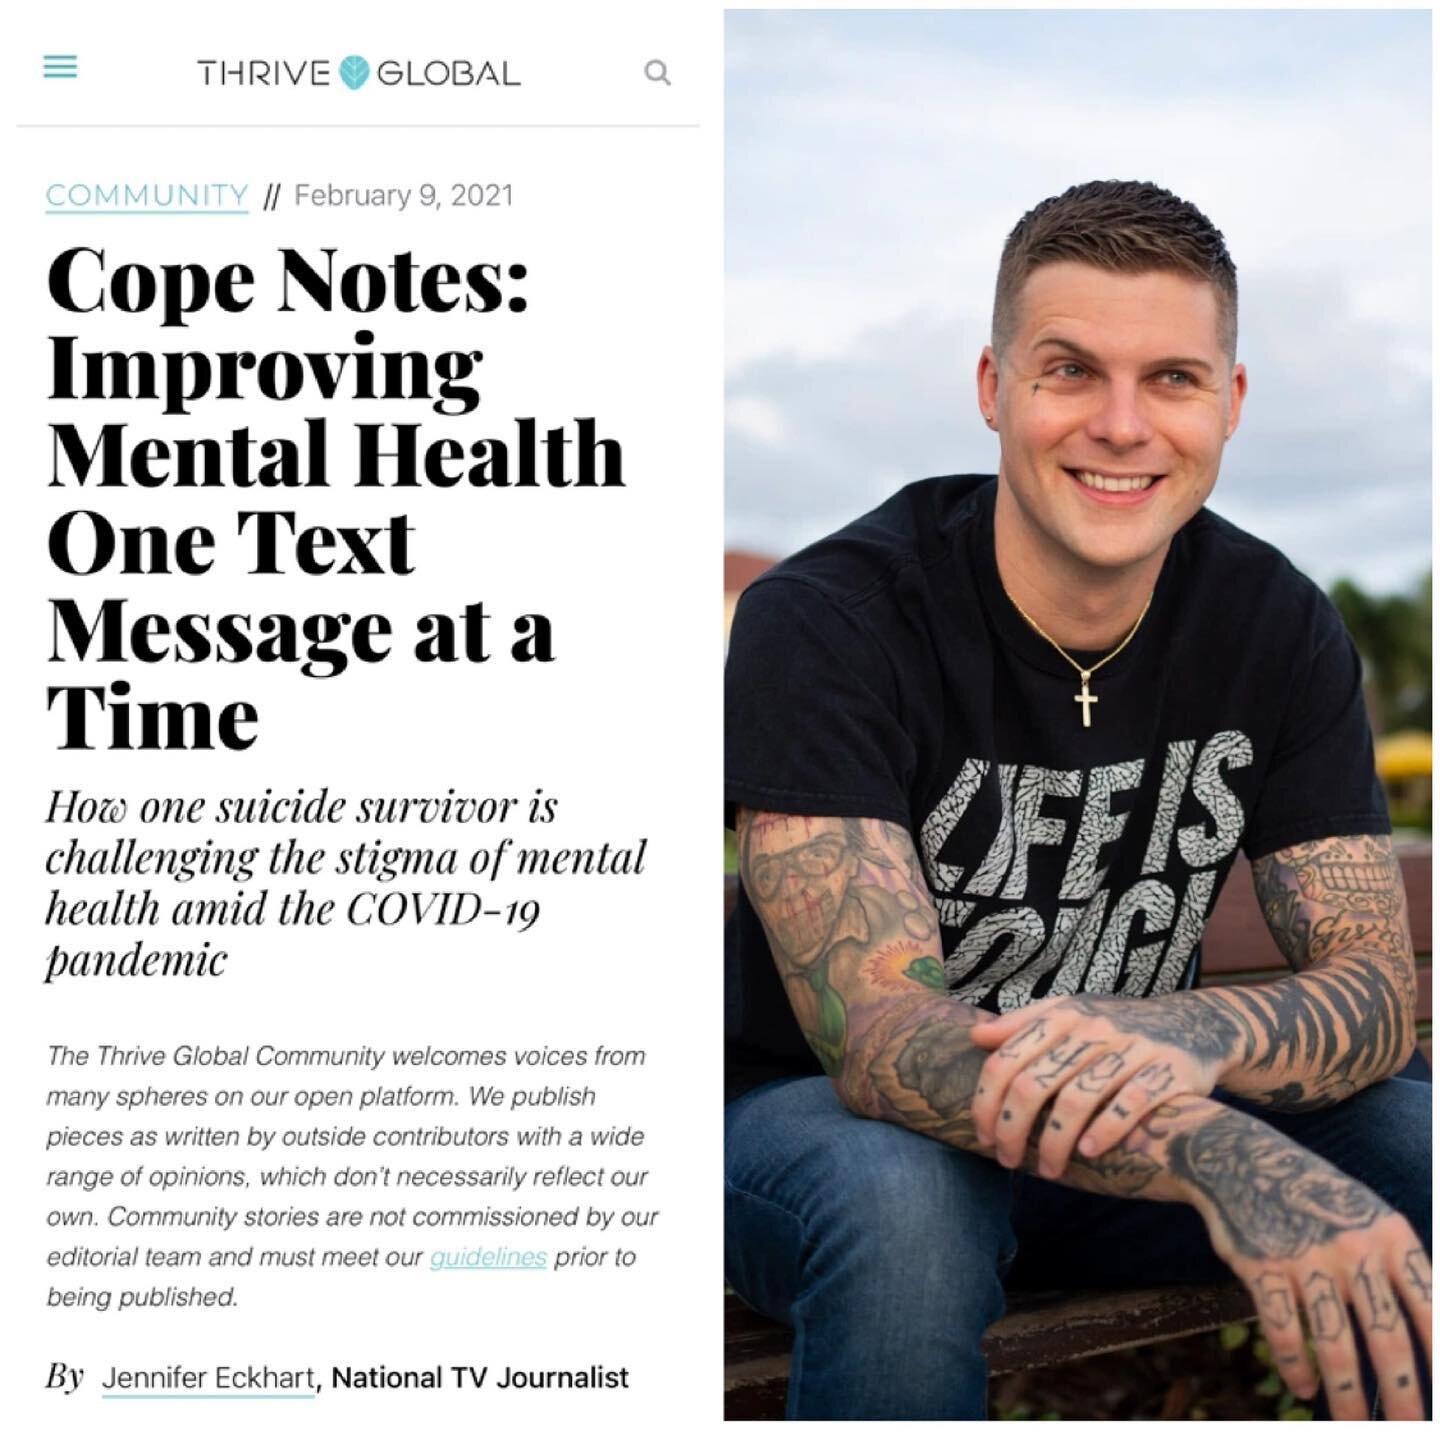 I am proud to share my latest piece that was just published to @Thrive!

Johnny Crowder is a suicide attempt survivor, rock musician and the founder &amp; CEO of Cope Notes. His U.S.-based company is challenging the stigma of mental health amid the C